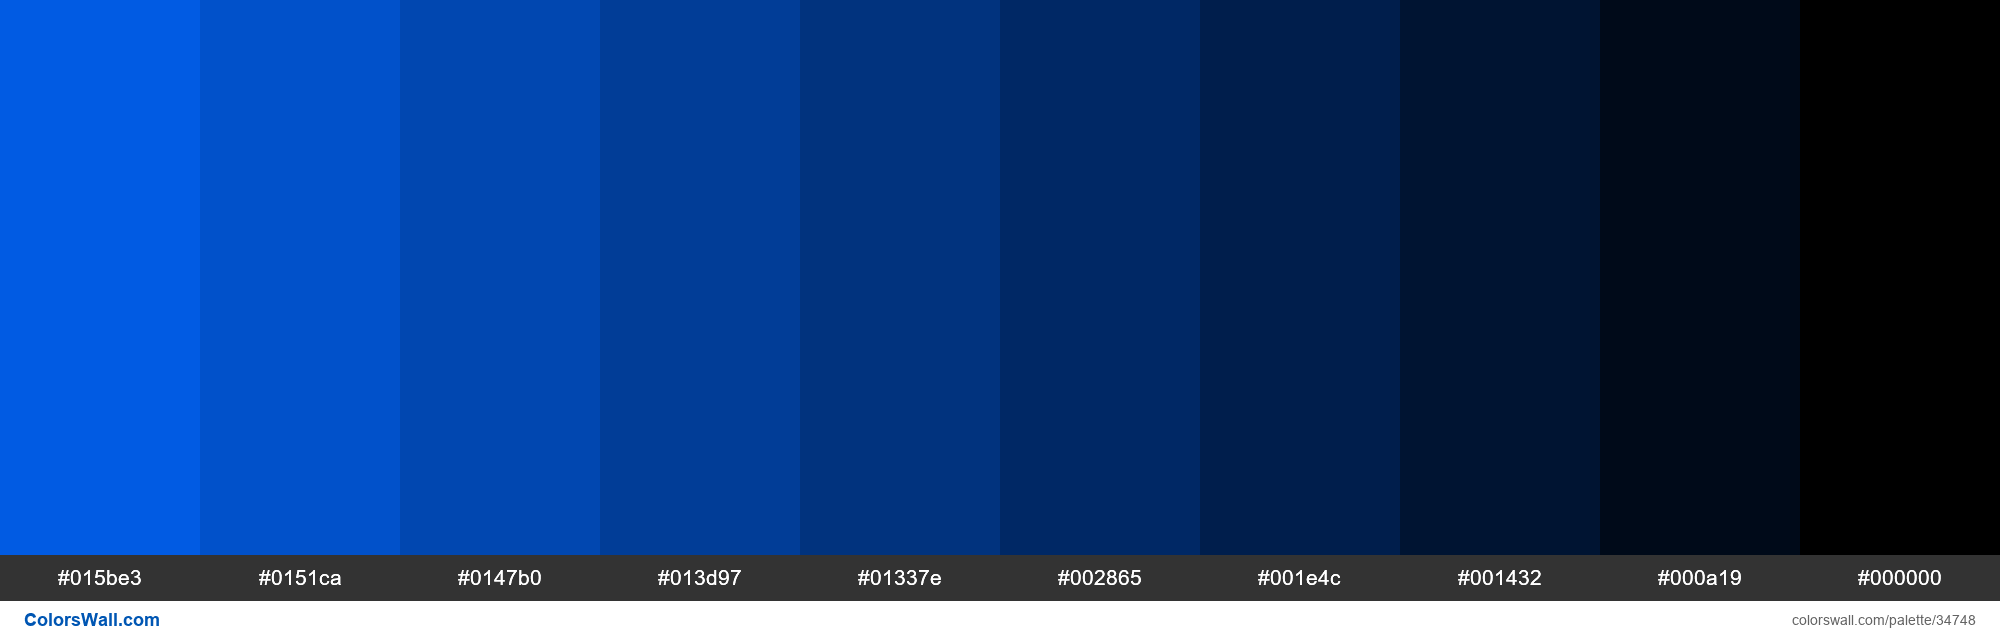 Shades Xkcd Color Bright Blue 0165fc Hex Hex Rgb Codes